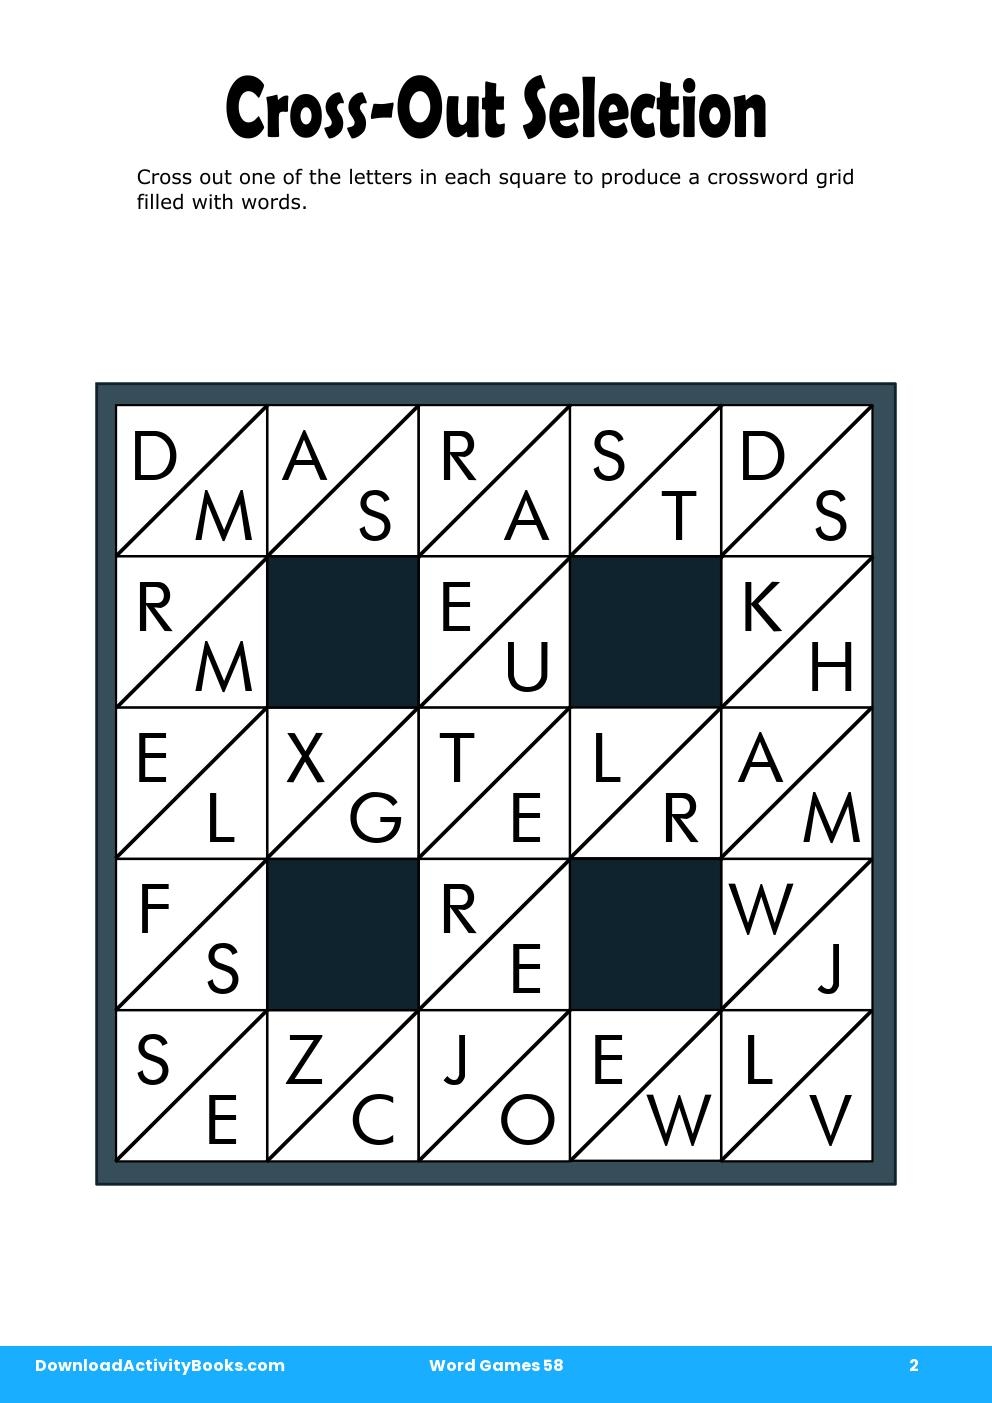 Cross-Out Selection in Word Games 58